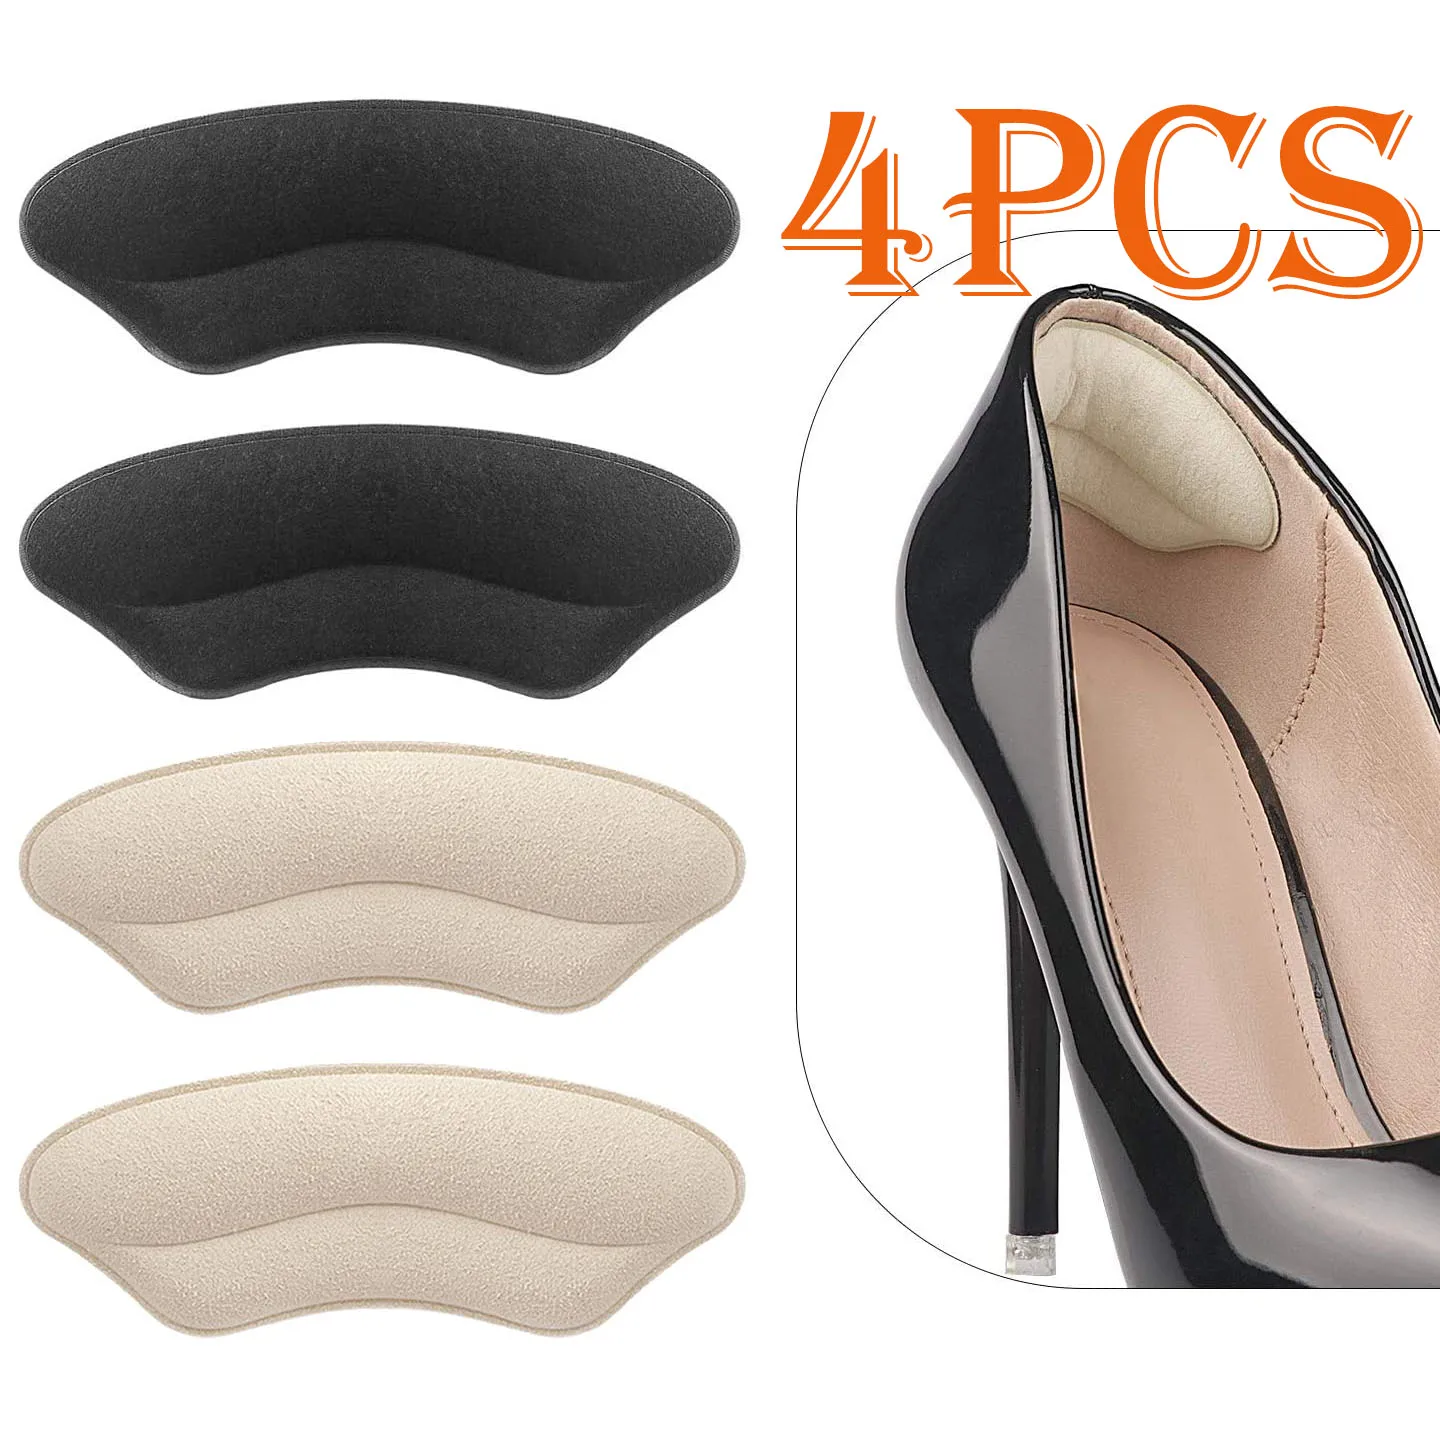 

4PCS Heel Grips Liner Cushions Inserts for Loose Shoes Heel Pads Snugs for Shoe Too Big Men Women Prevent Heel Slip and Blister